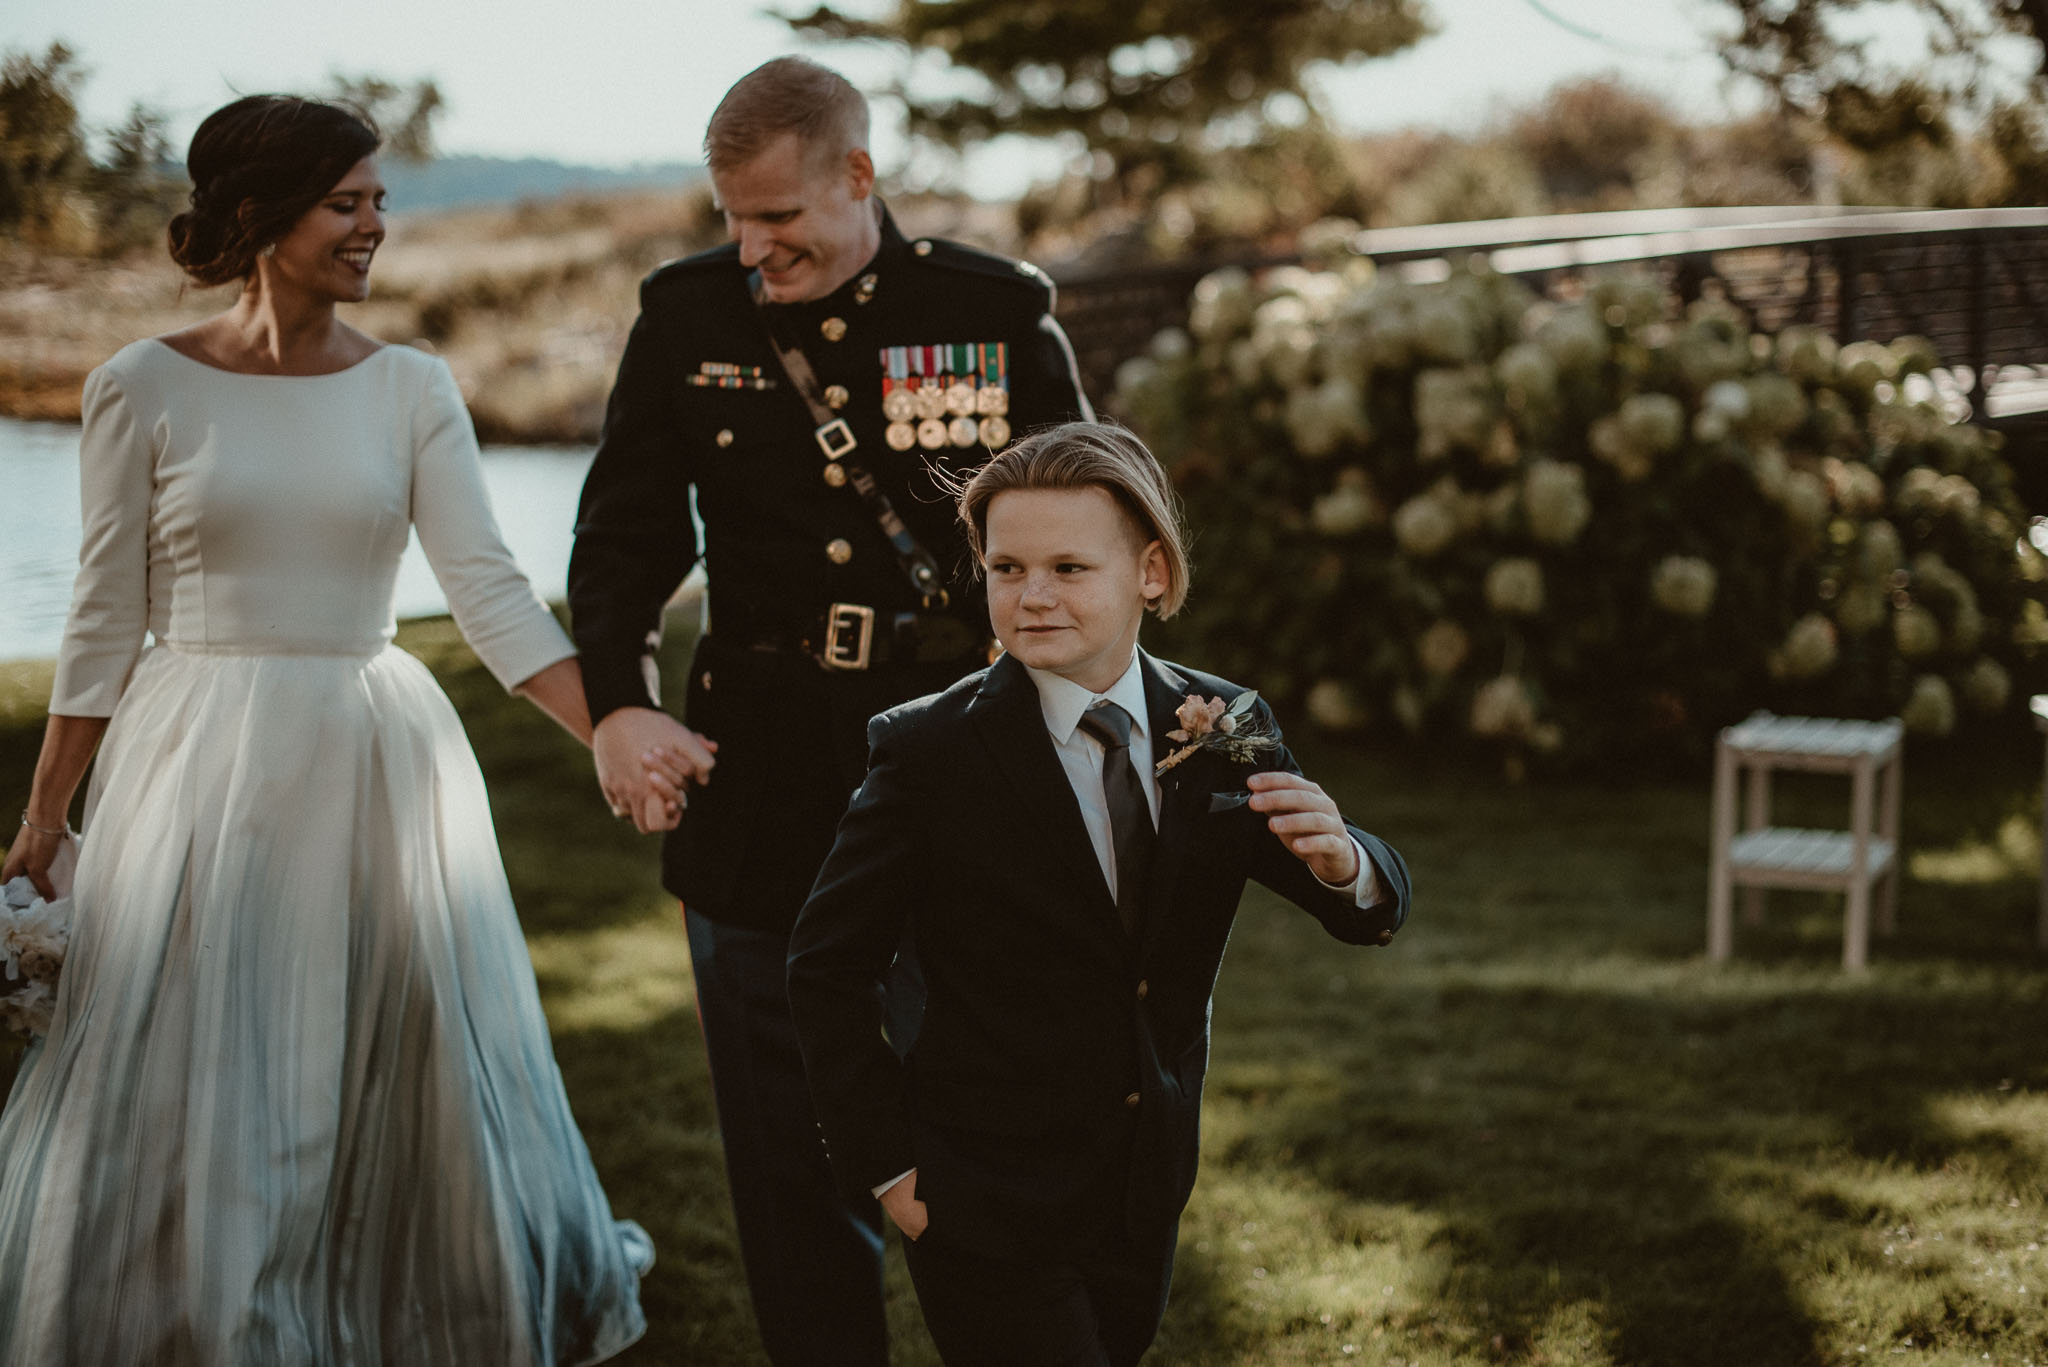 Bride and Groom walking with their son ahead of them.